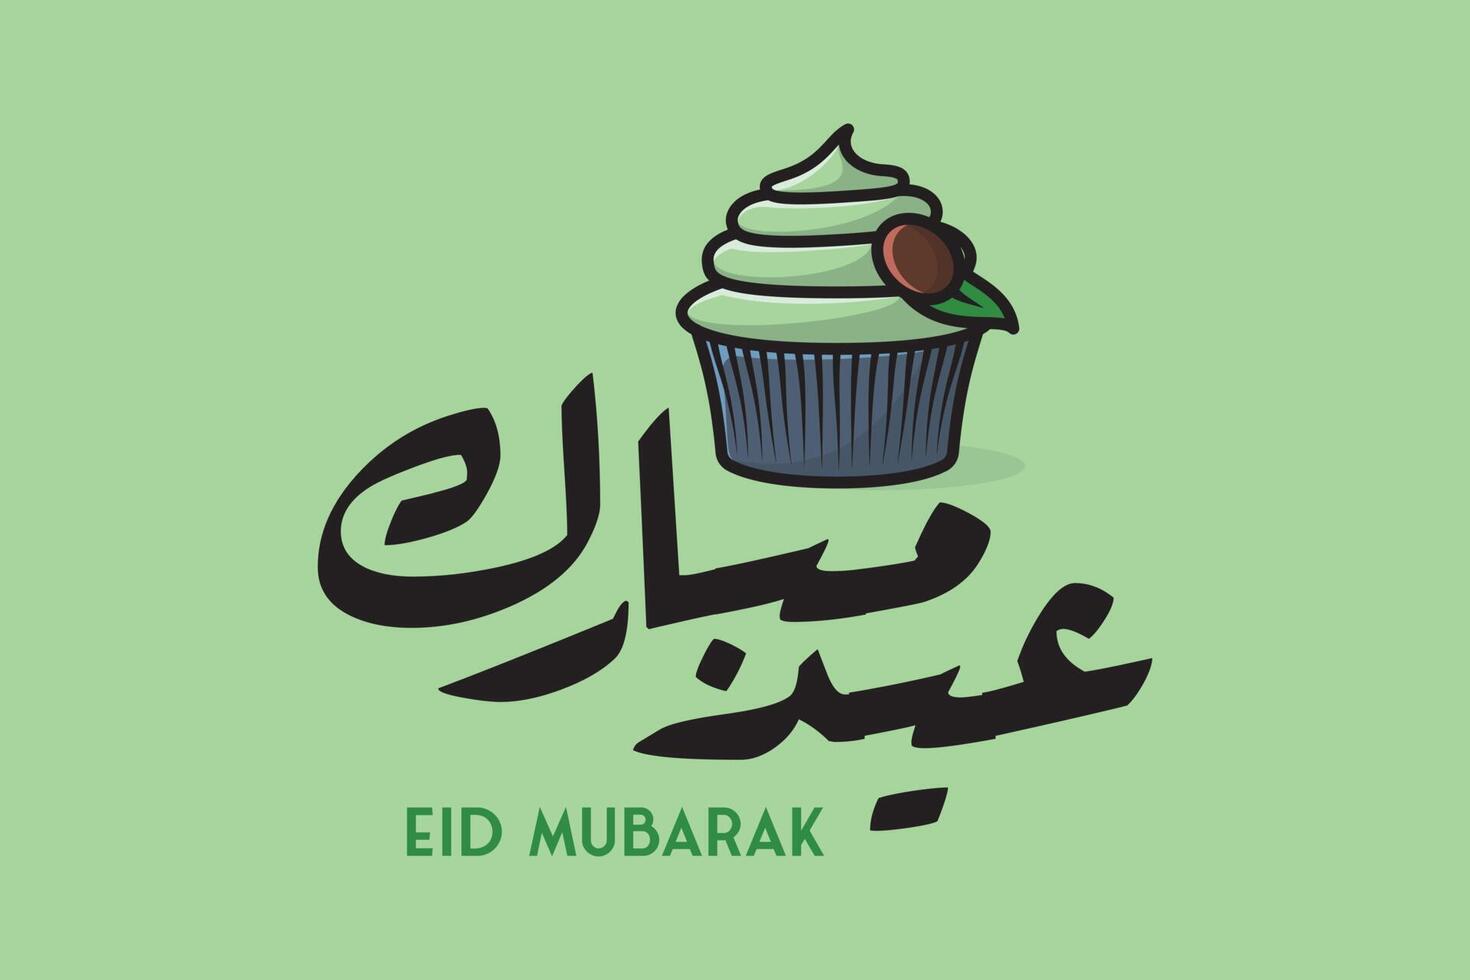 Eid al Fitr Festival Delicious Sweet Ice Cream with Eid Mubarak Calligraphy vector greeting background poster design. Islamic holiday icon concept. Eid Mubarak festival traditional food vector design.